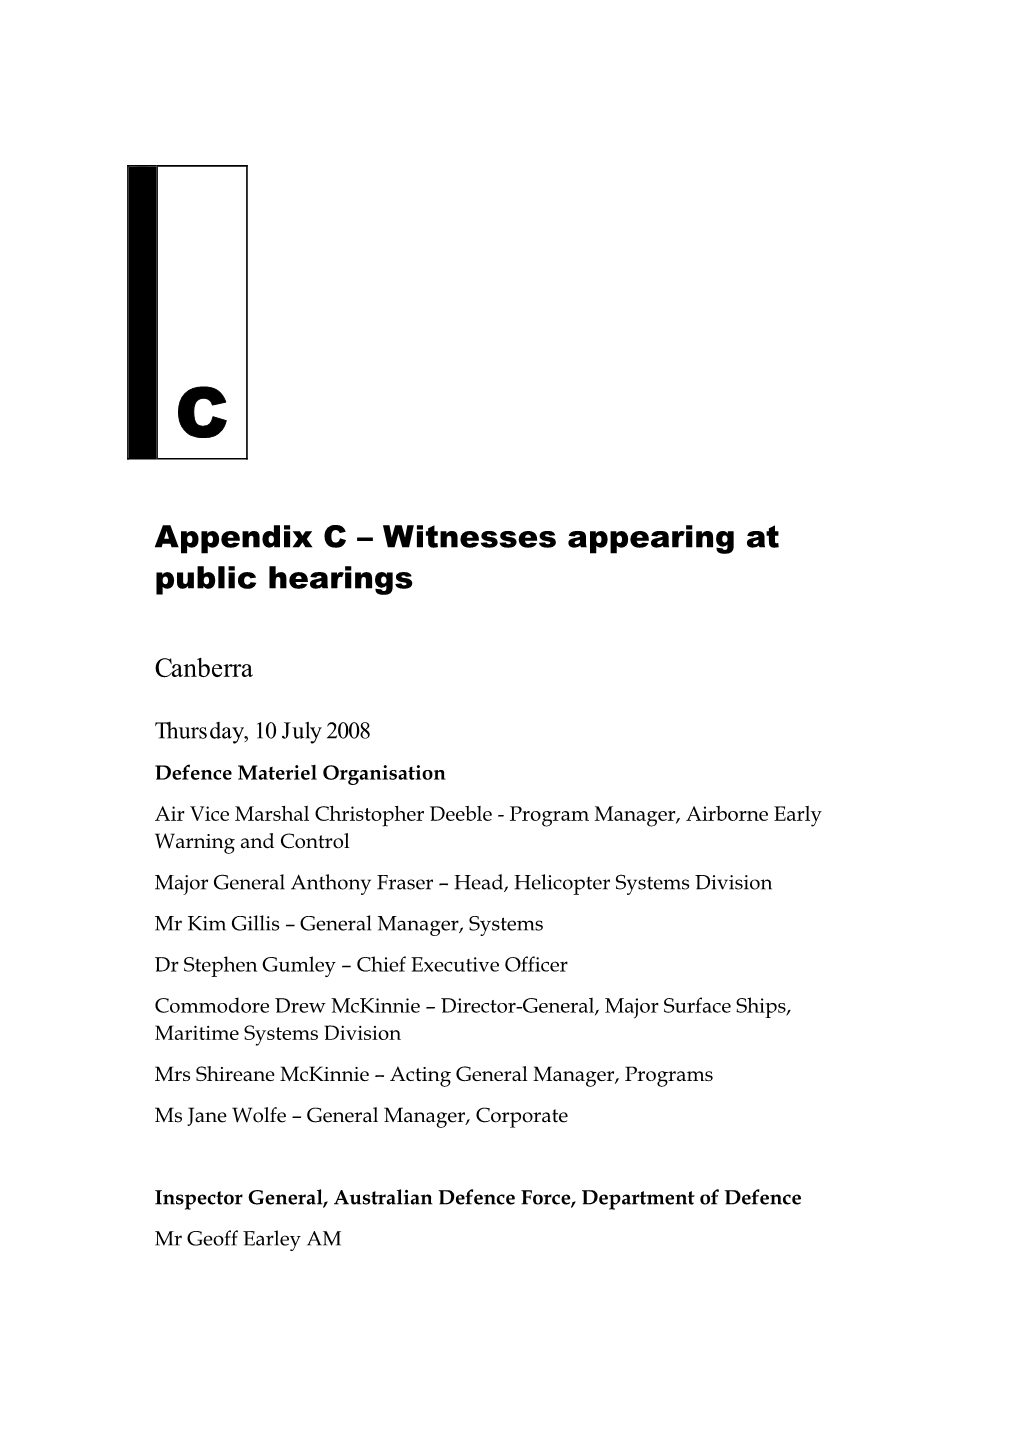 Appendix C: Witnesses Appearing at Public Hearings